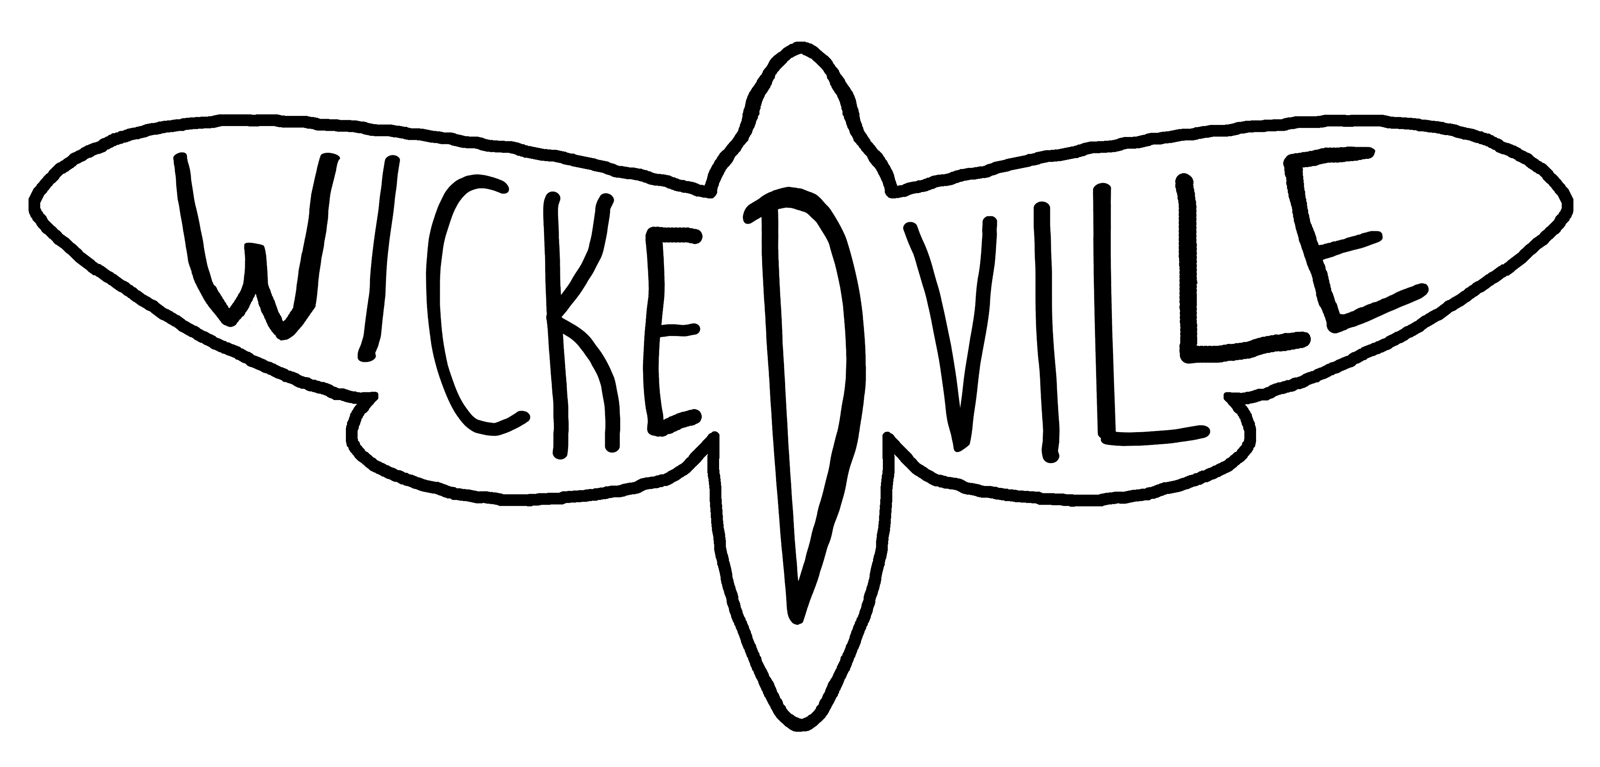 WICKEDVILLE